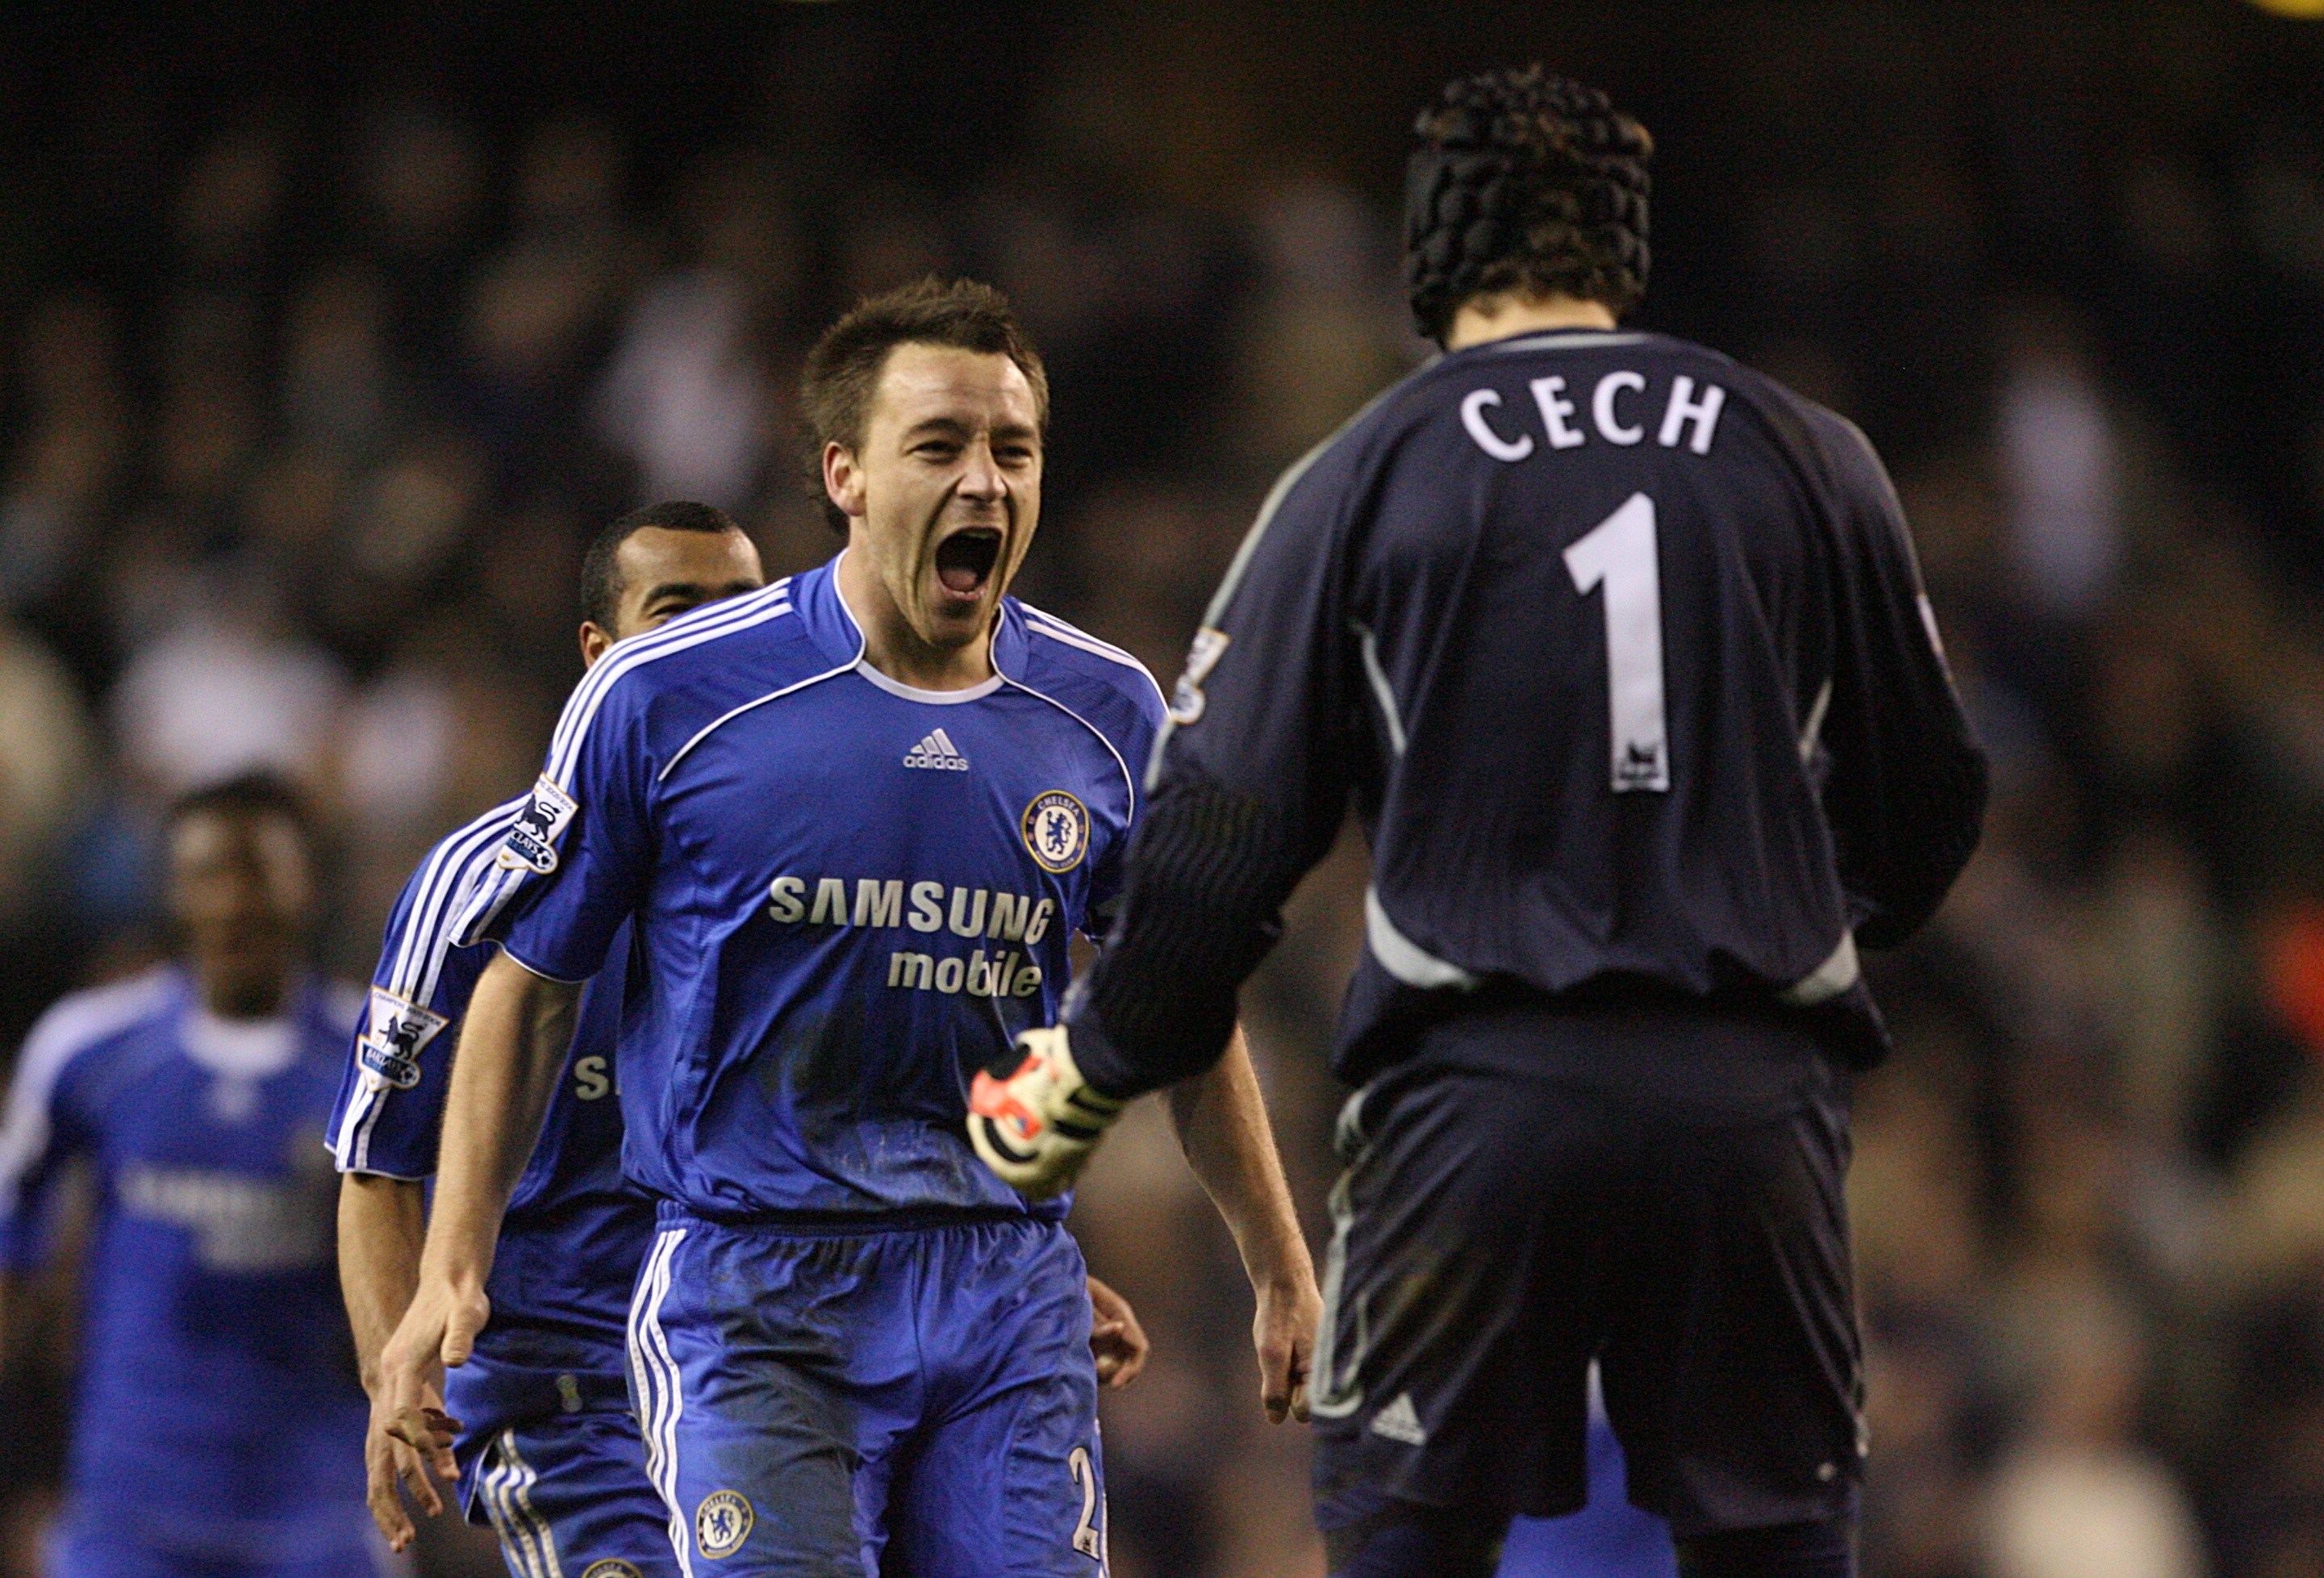 Petr Cech details how John Terry influenced Chelsea’s rivalry with Spurs